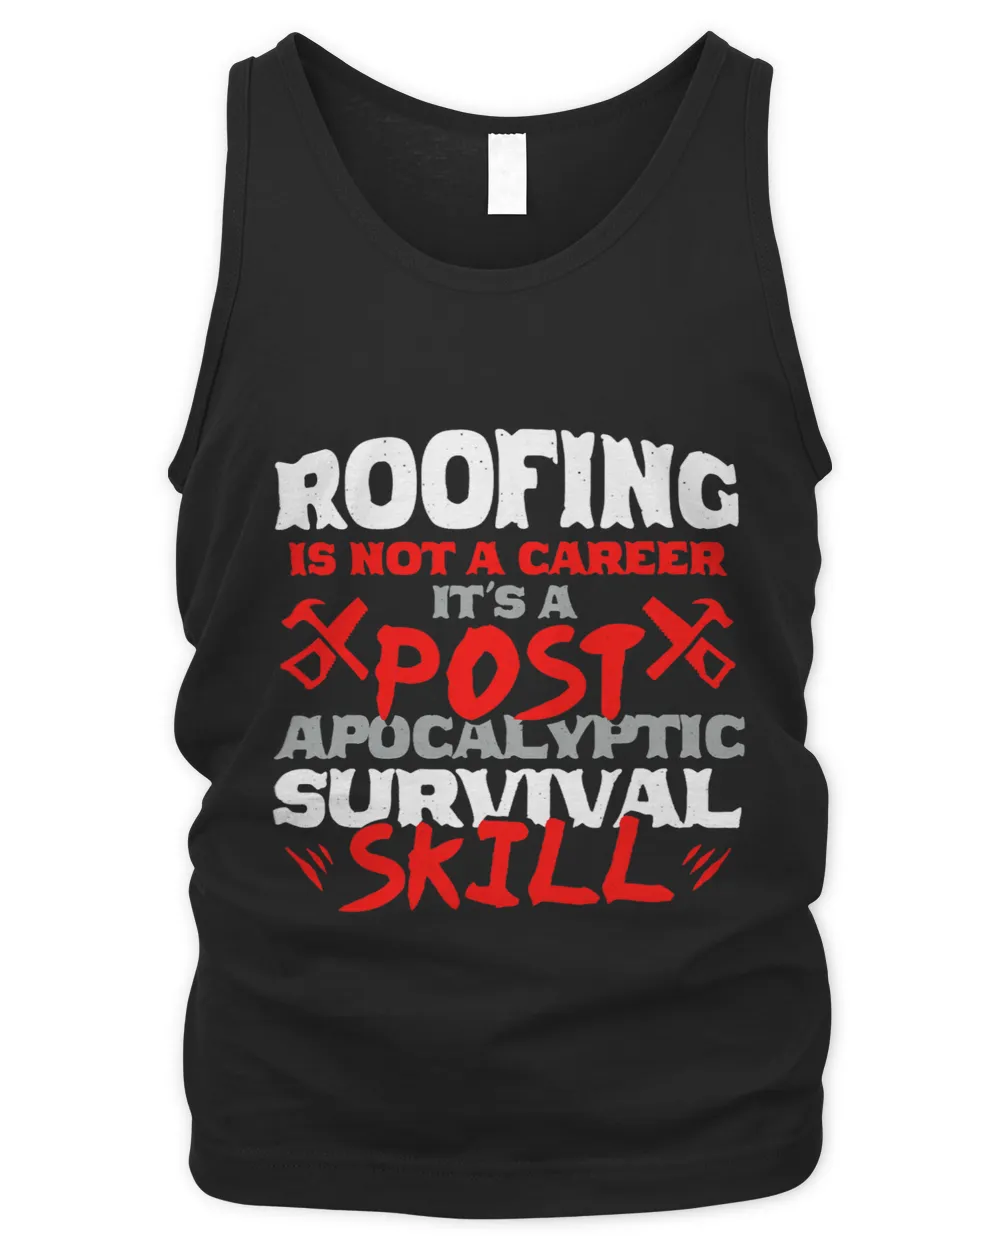 Roofing Is Not A Career Its Survival Skill Roofer Slater